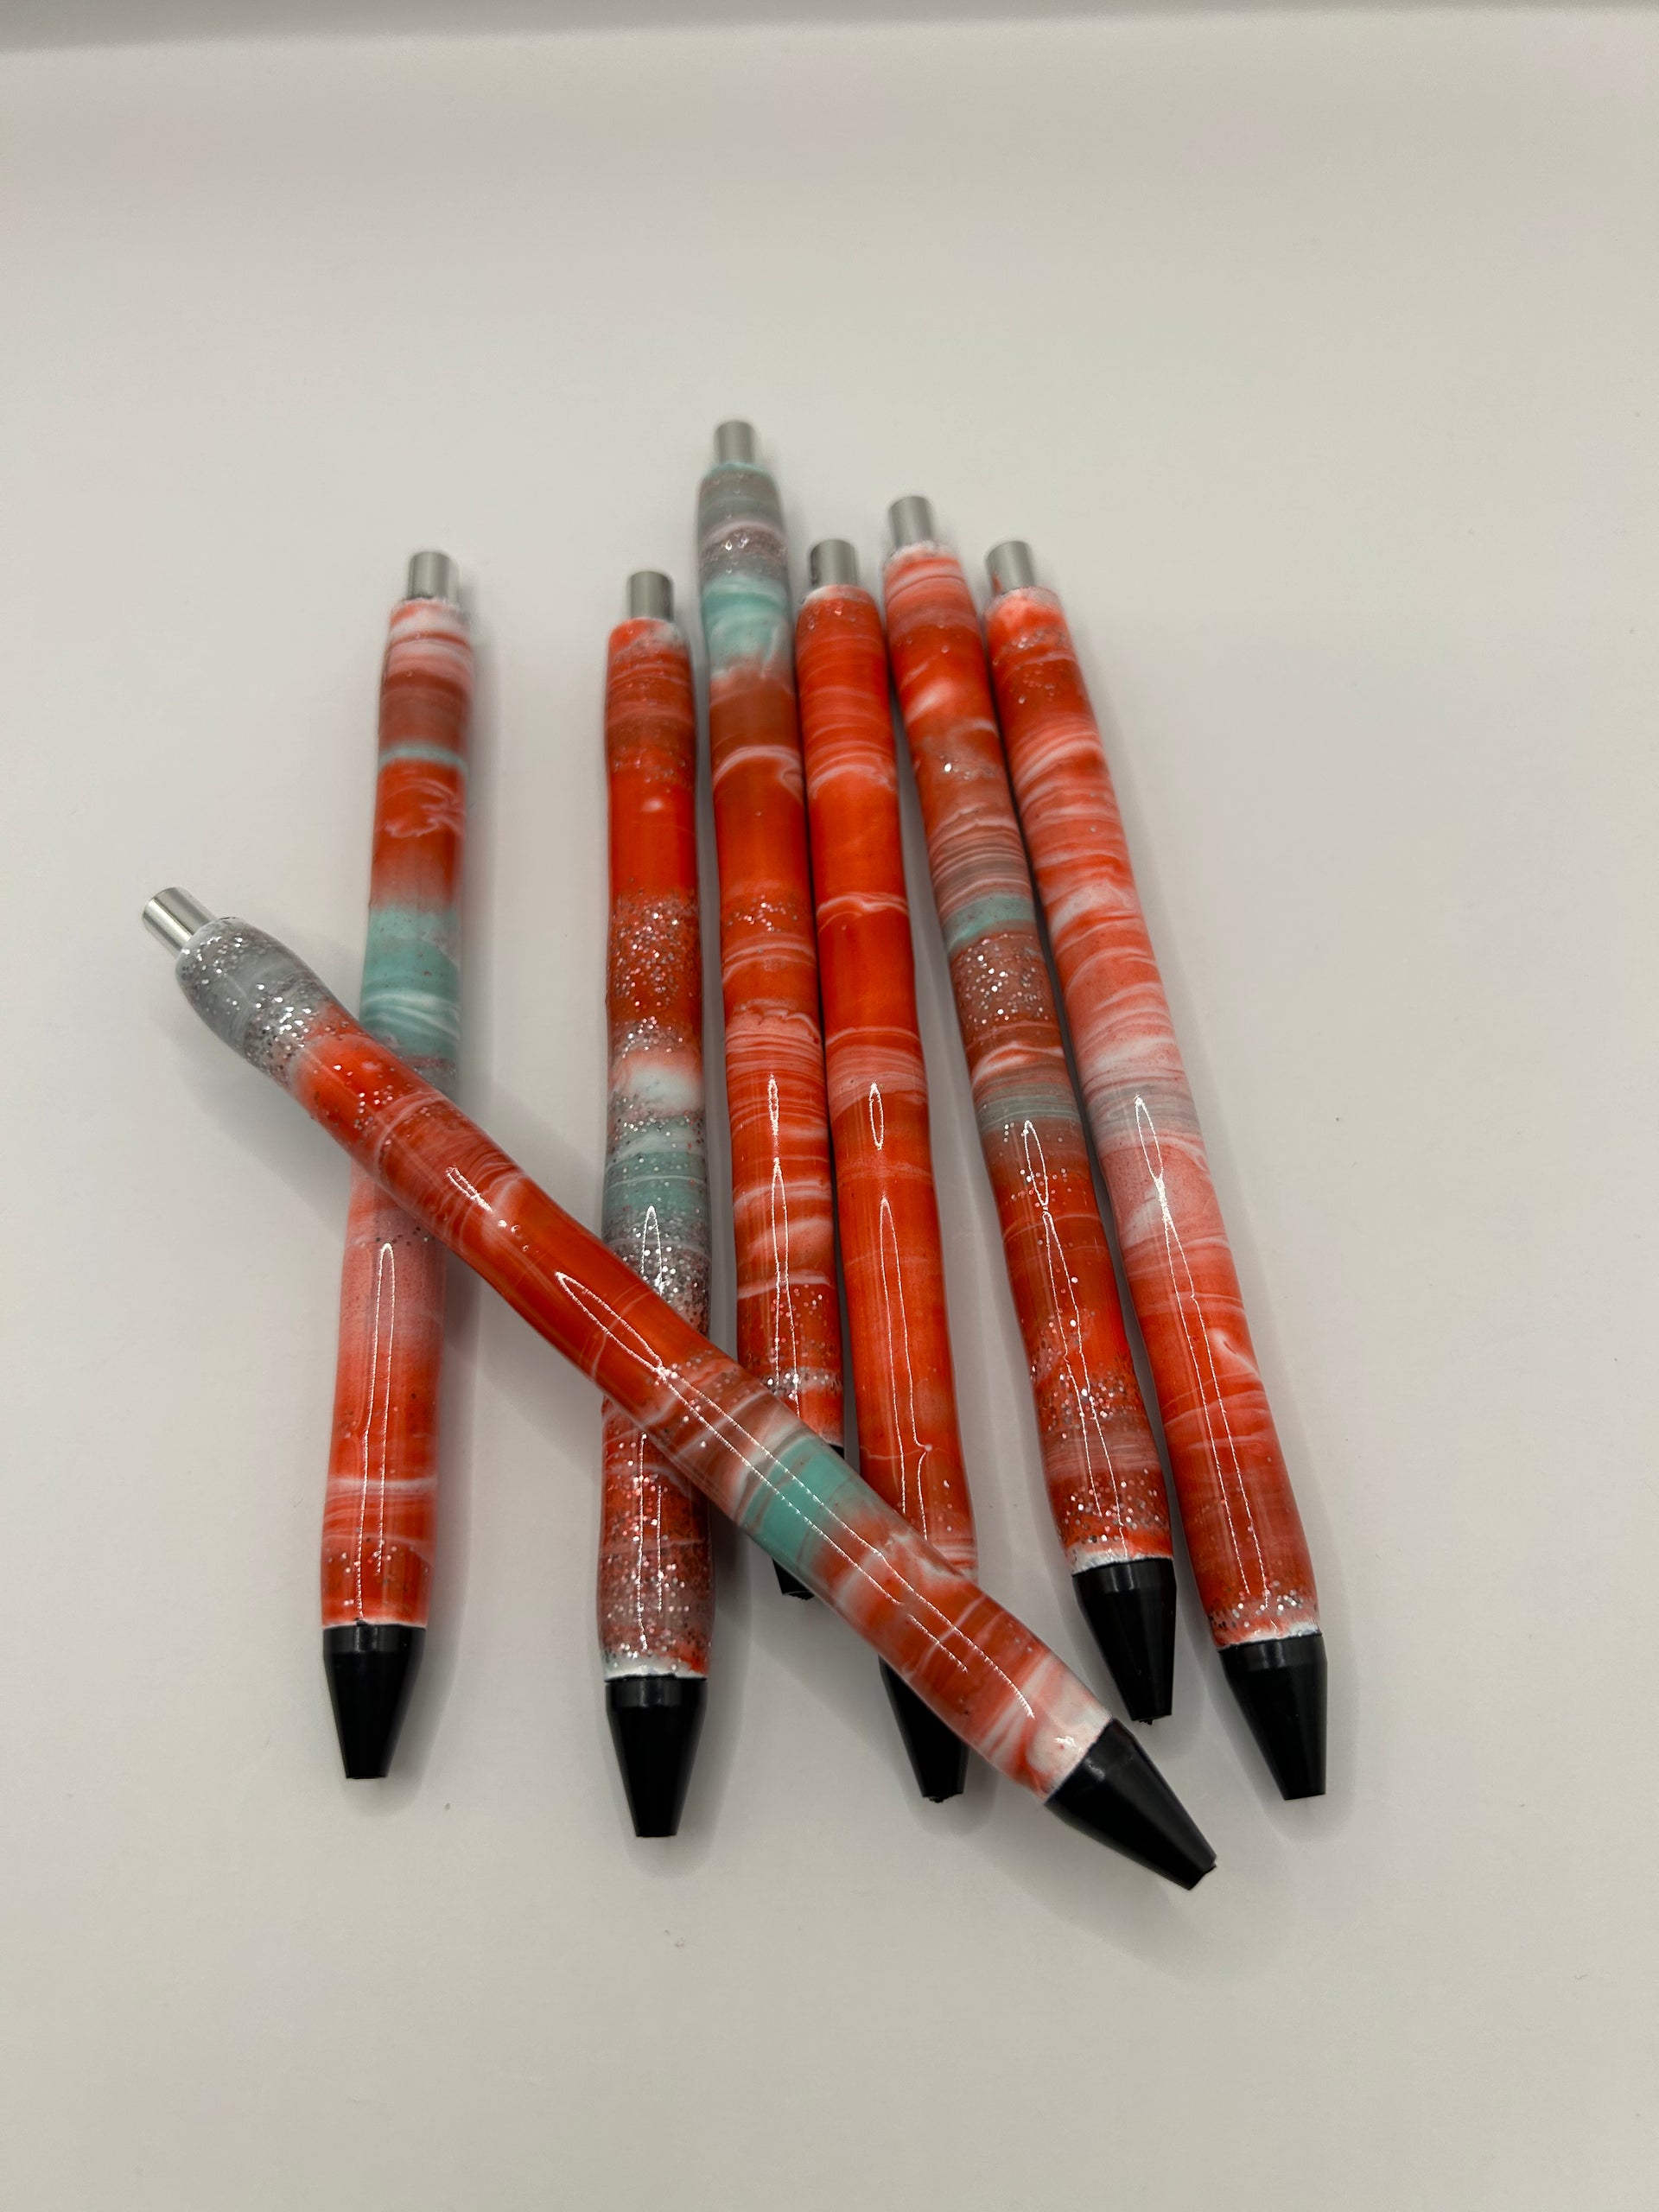 Soft colored ink pens - JUST BREATHE – #SimplyGood